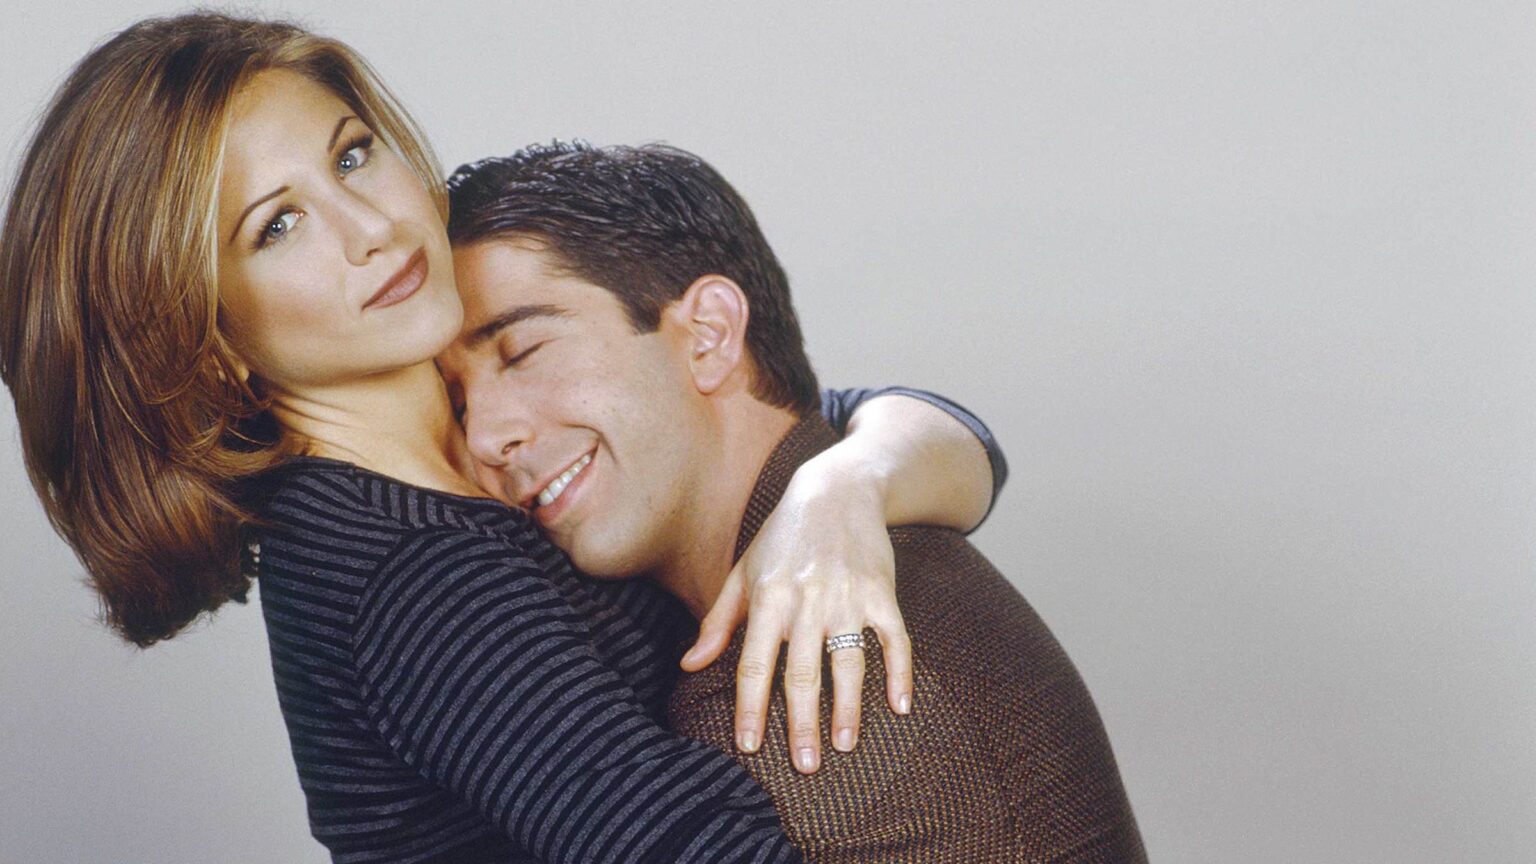 We’ve gathered up our favorite 'Friends' moments from Ross & Rachel’s journey, proving the two are absolute endgame.